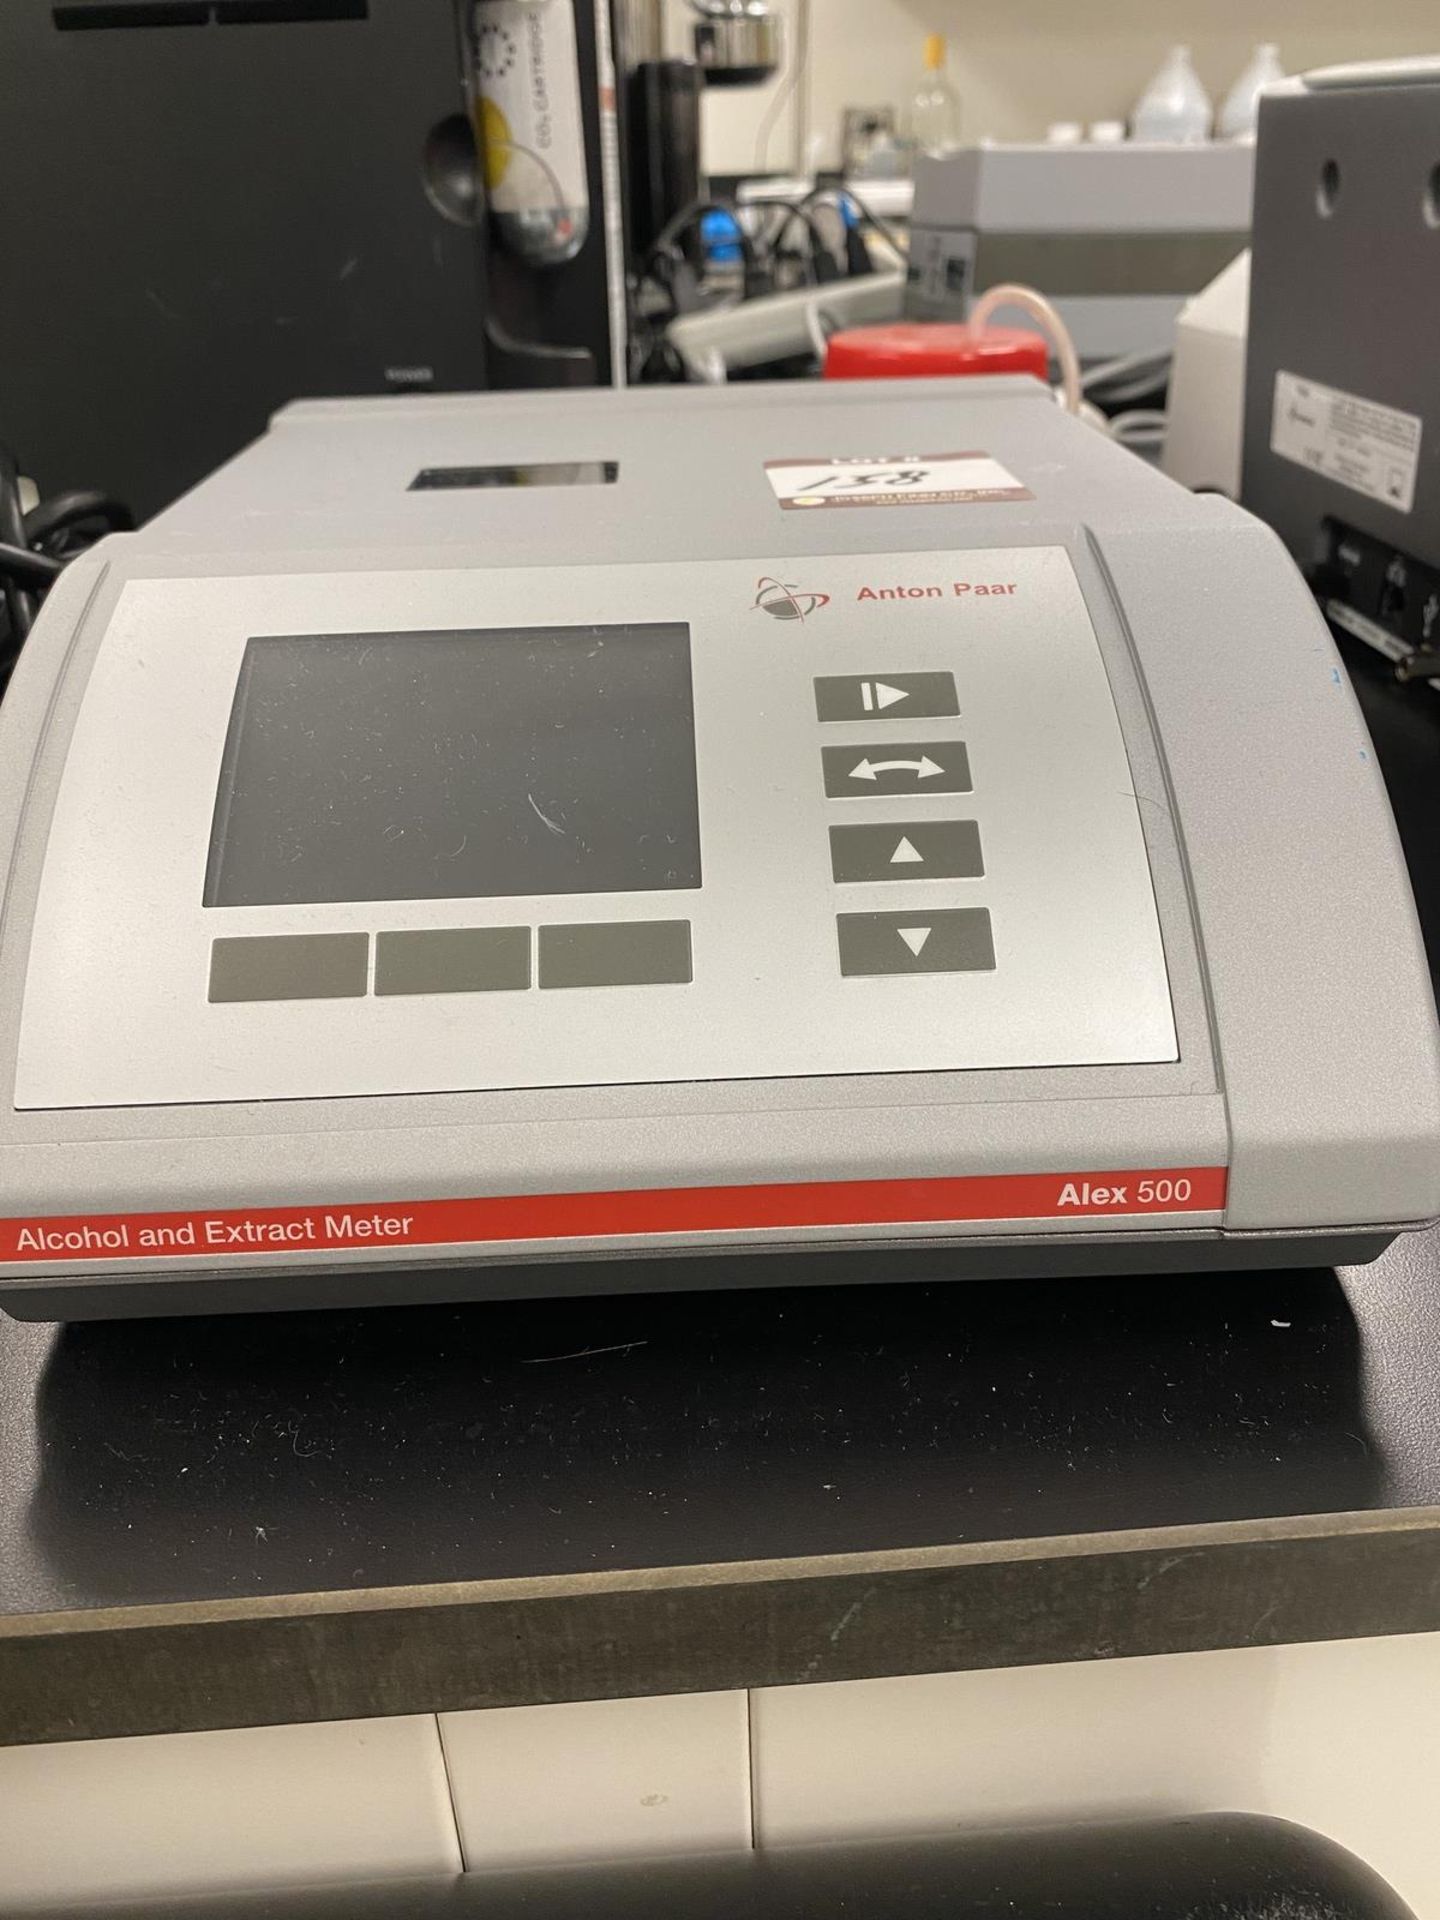 Anton Paar Alex 500 Alcohol and Extract Meter s/n 81870905 | Rig Fee: $250 or HC - Image 2 of 3